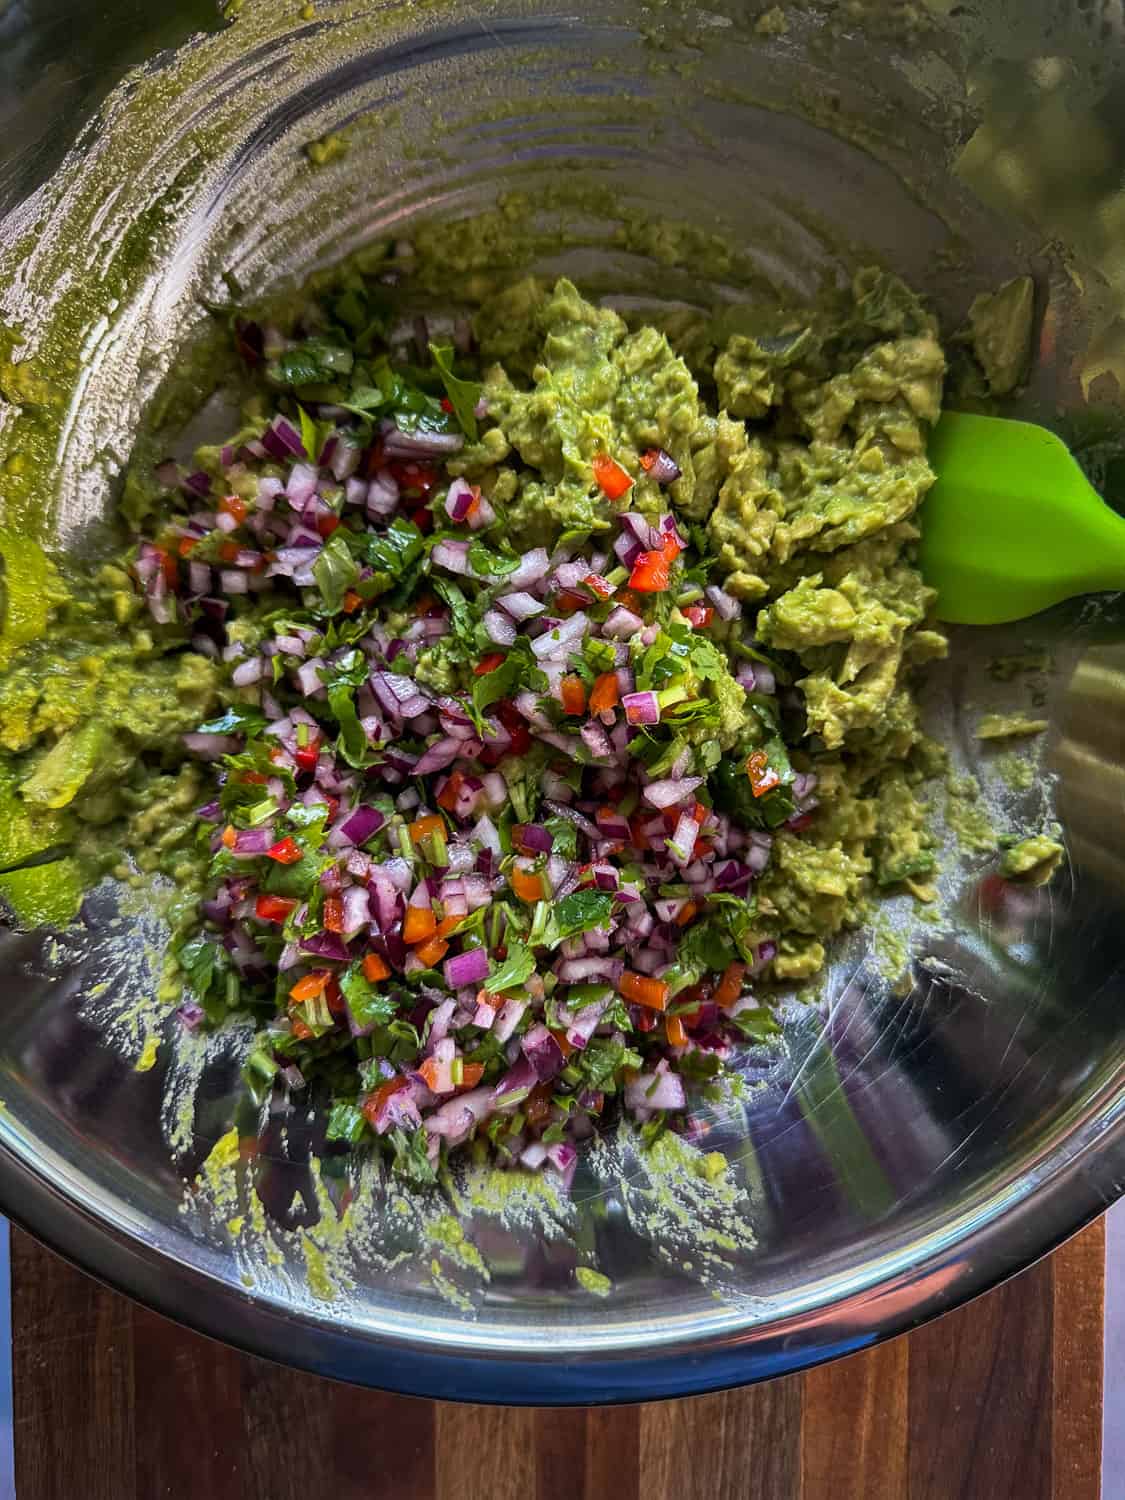 Guacamole ingredients in large bowl ready to be folded together